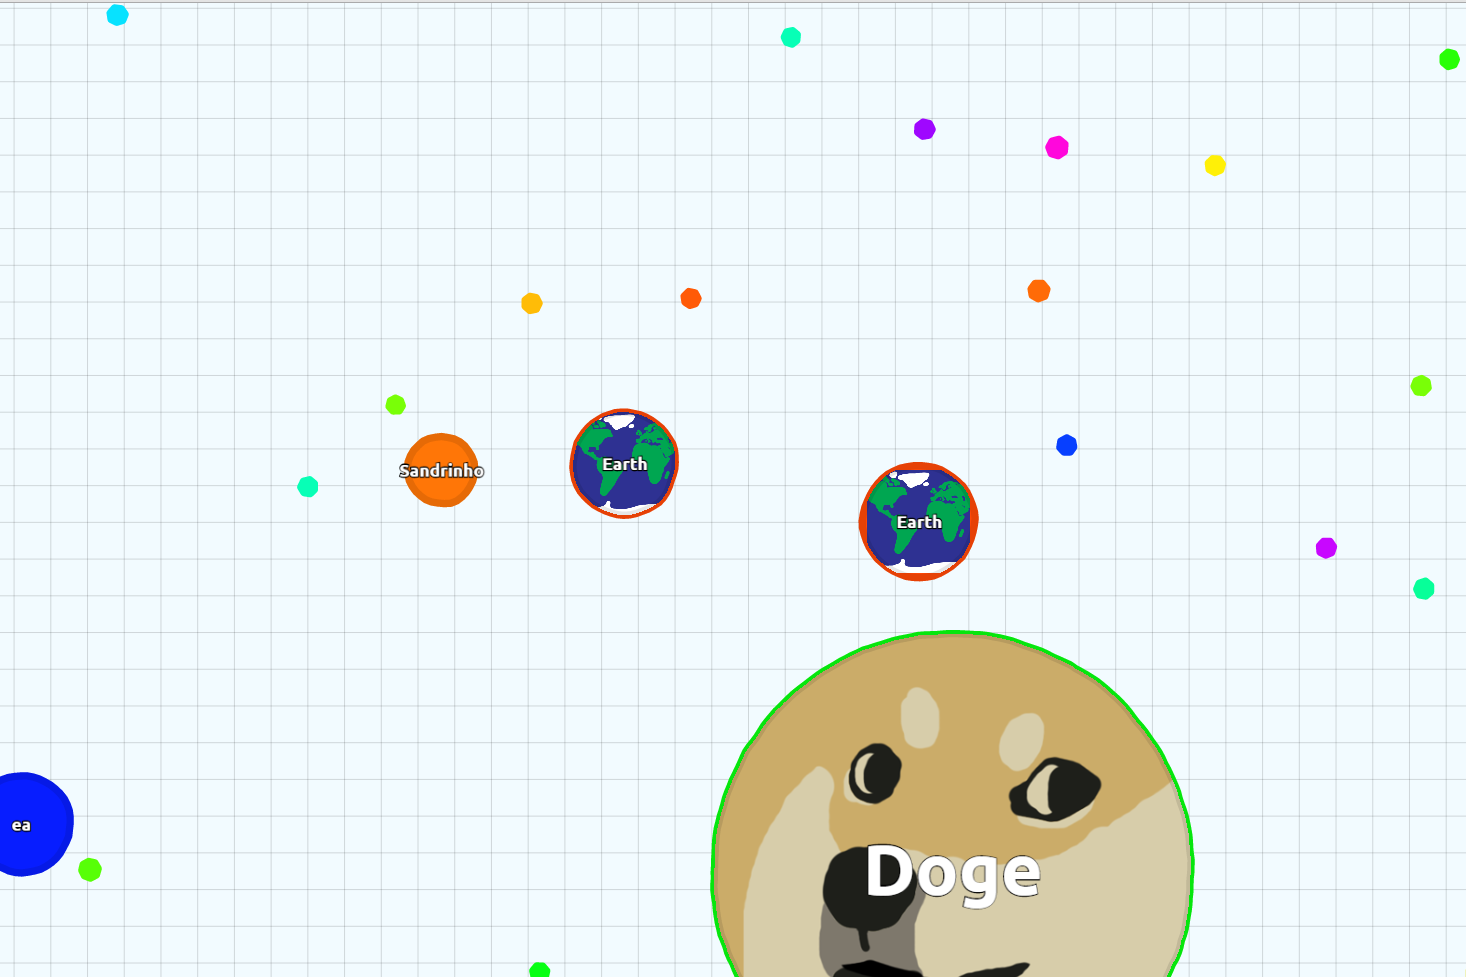 Why You Should Care About Agar.io